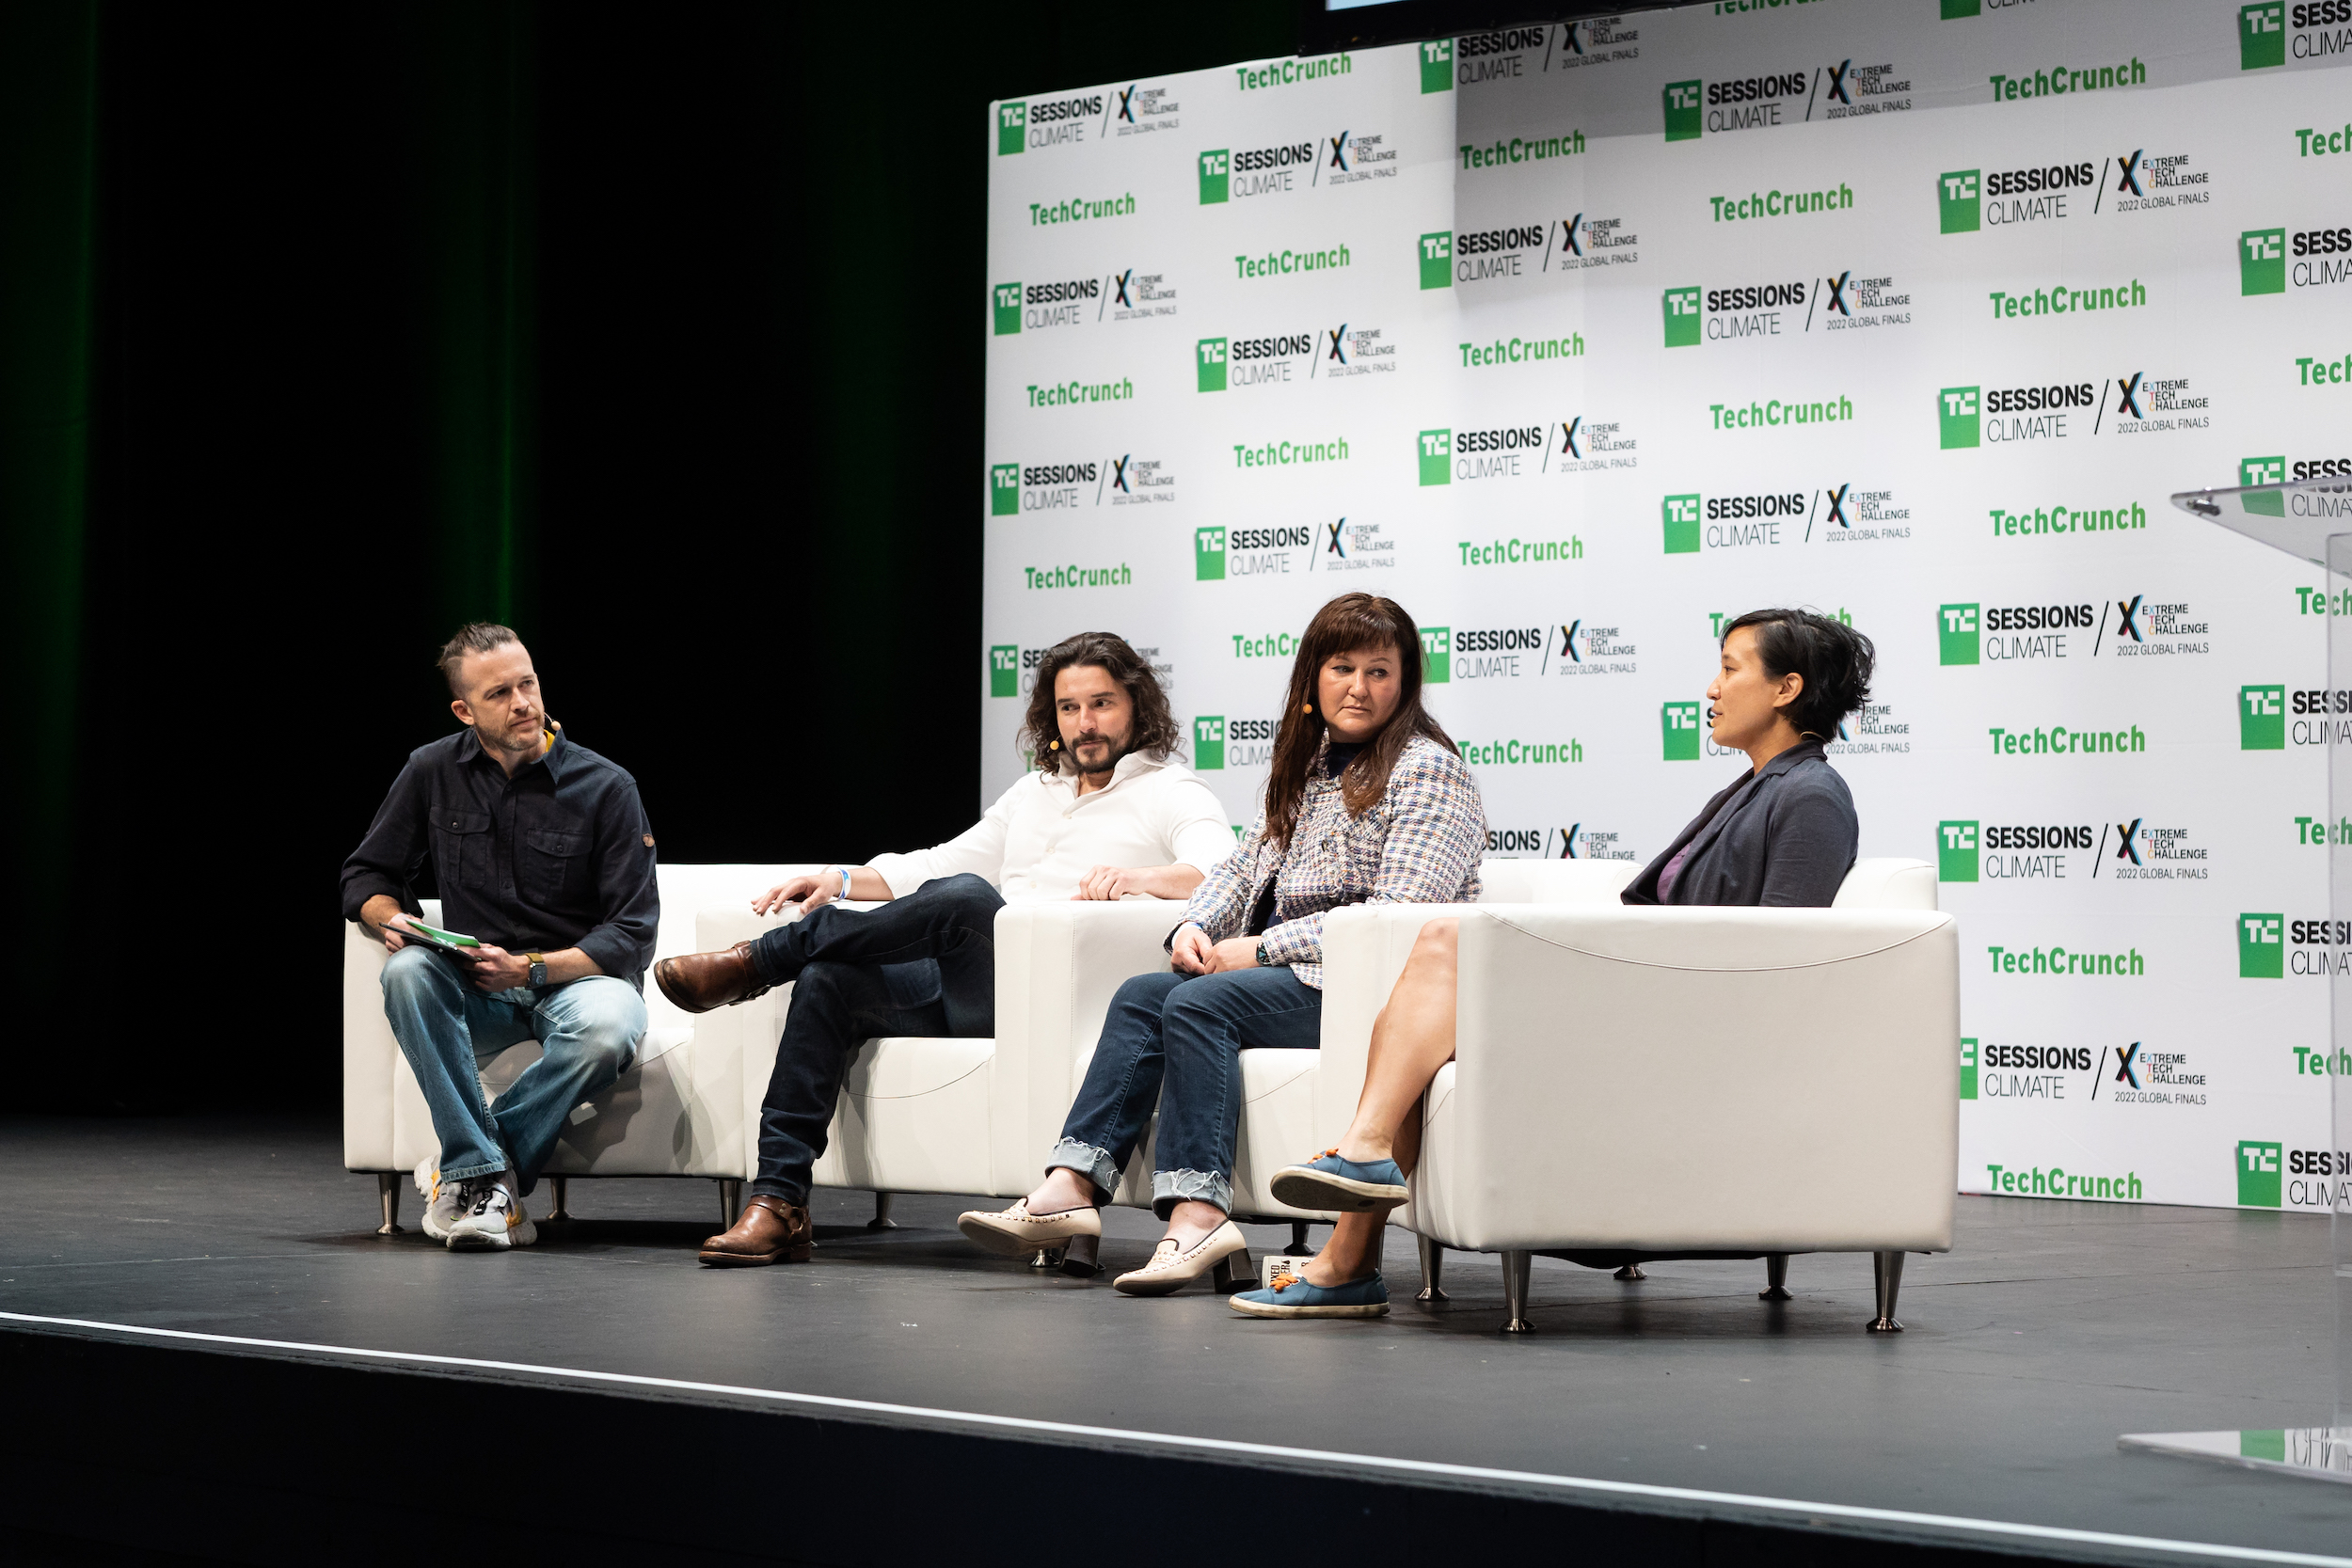 Tim De Chant interviews Christian Garcia, Kiersten Stead and Pae Wu at TC Sessions: Climate 2022